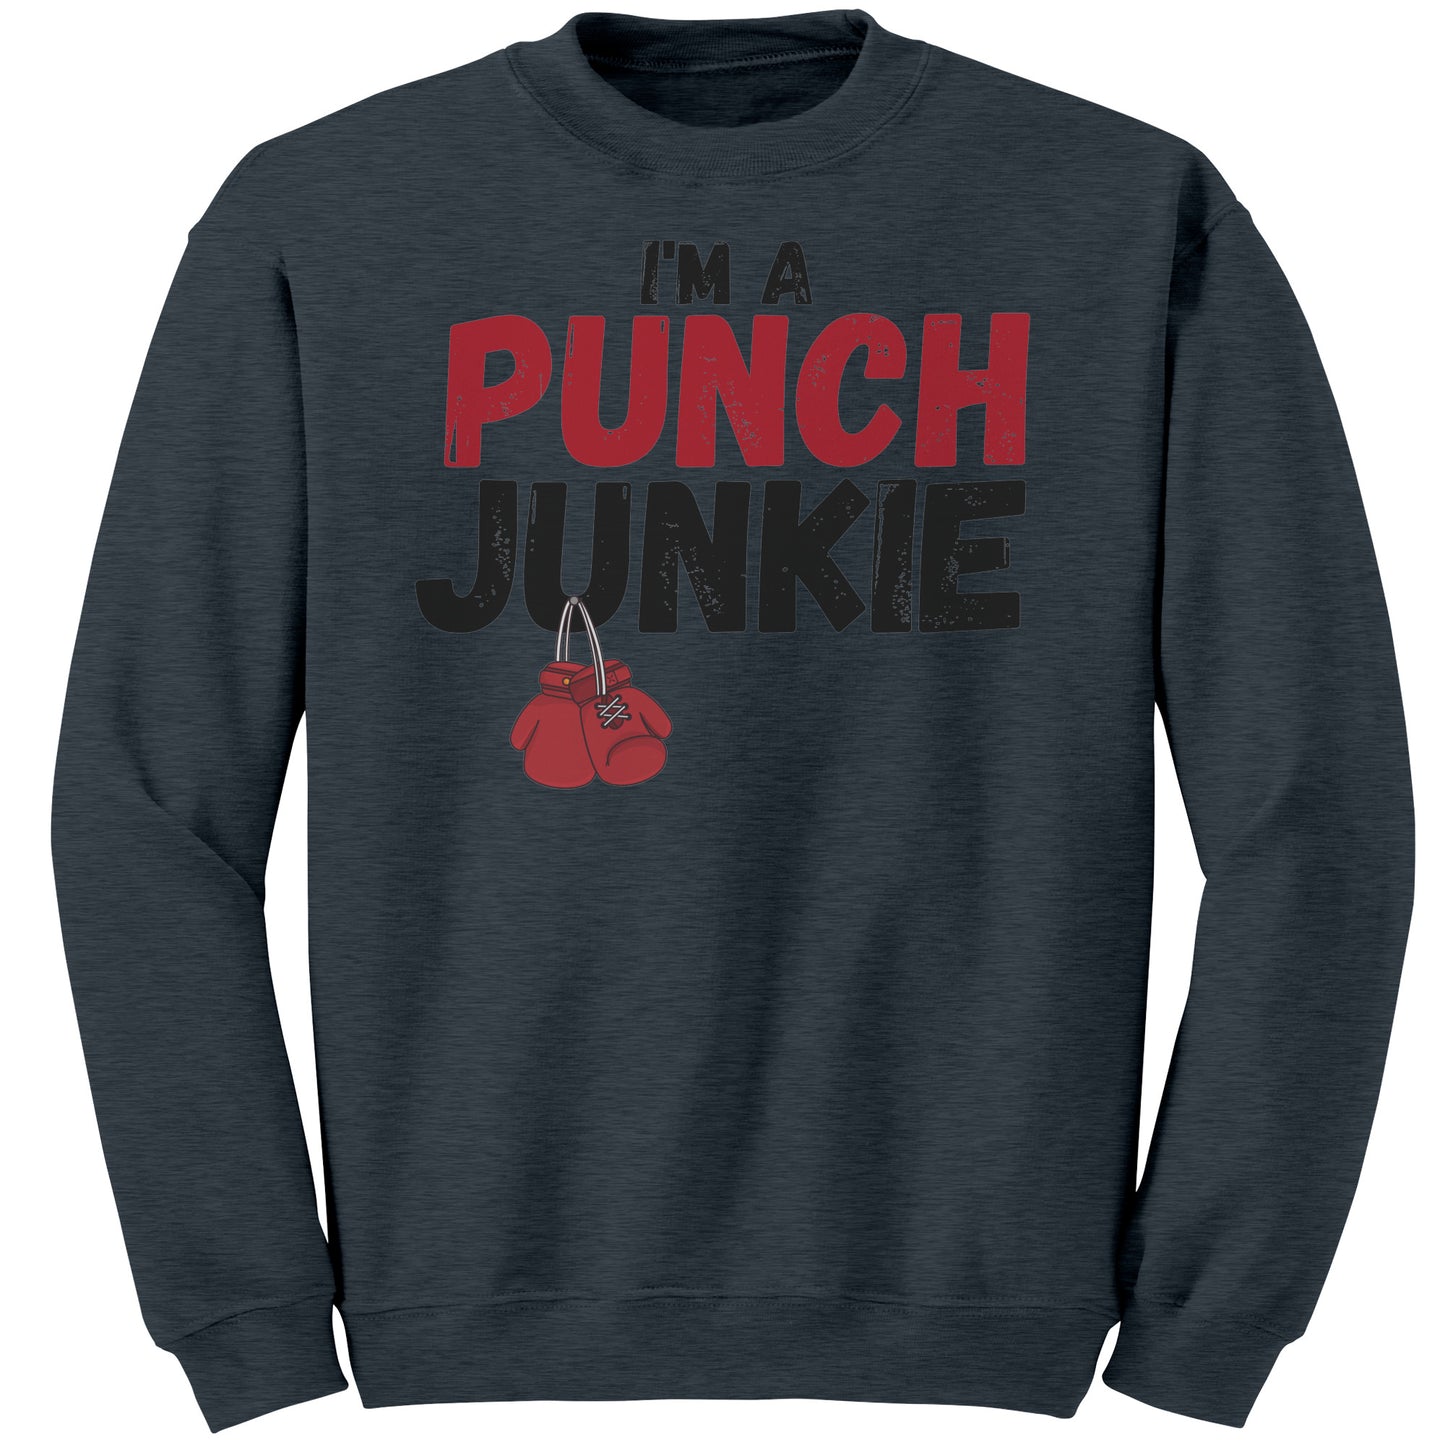 The "I'm a Punch Junkie" Sweat Shirt